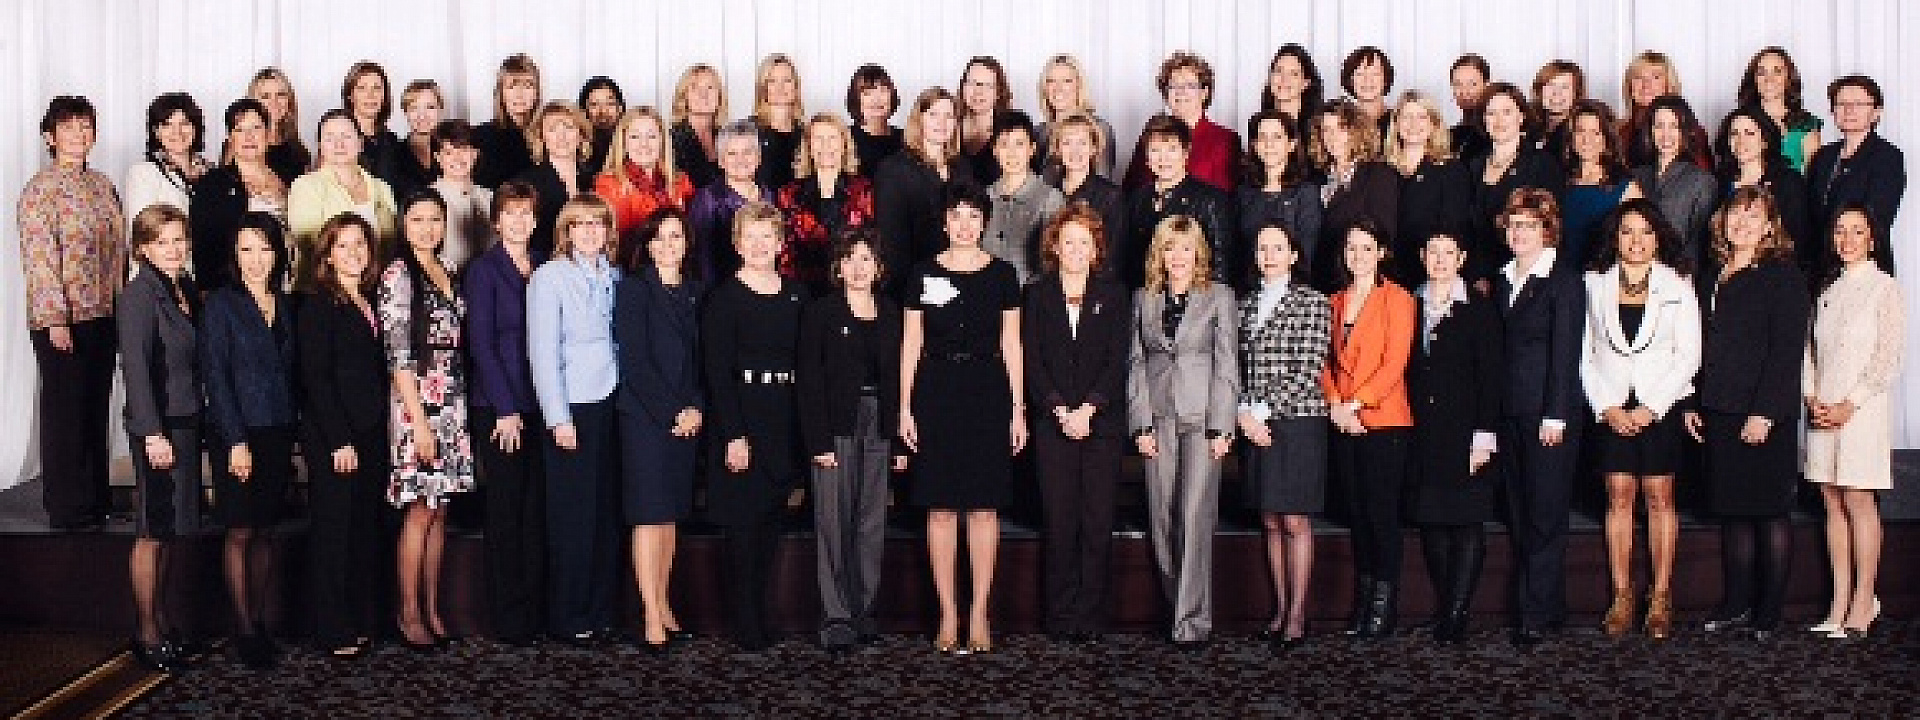 Top 100 most powerful women in Canada